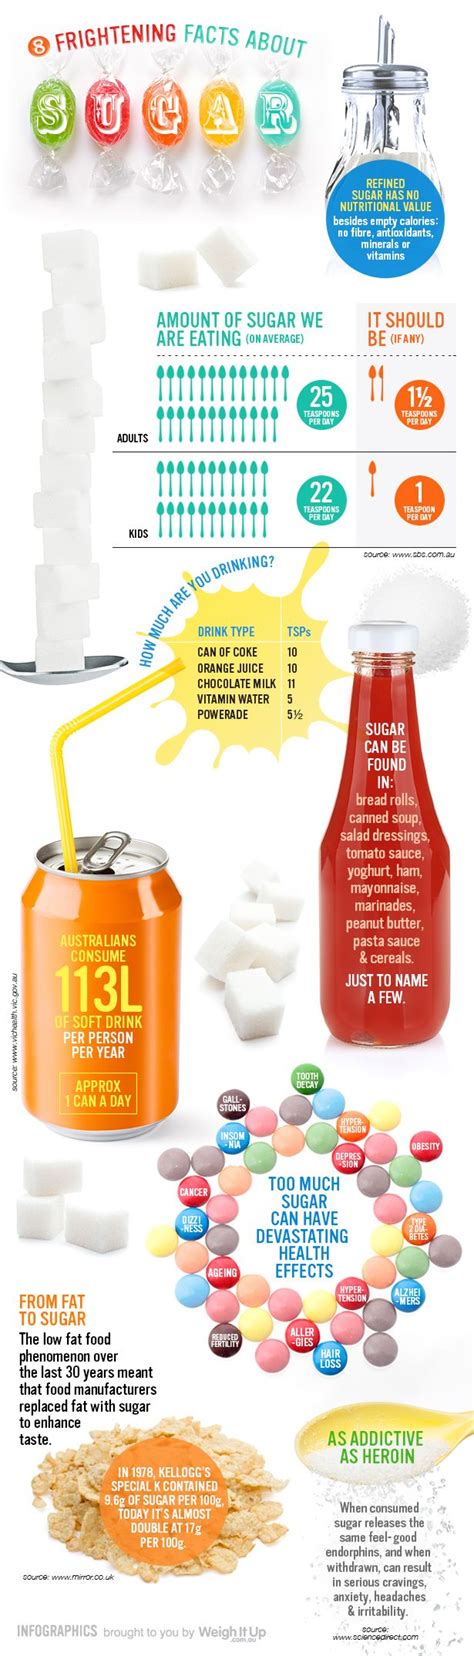 Sugar Infographic Food Infographic Sugar Facts Healthy Facts